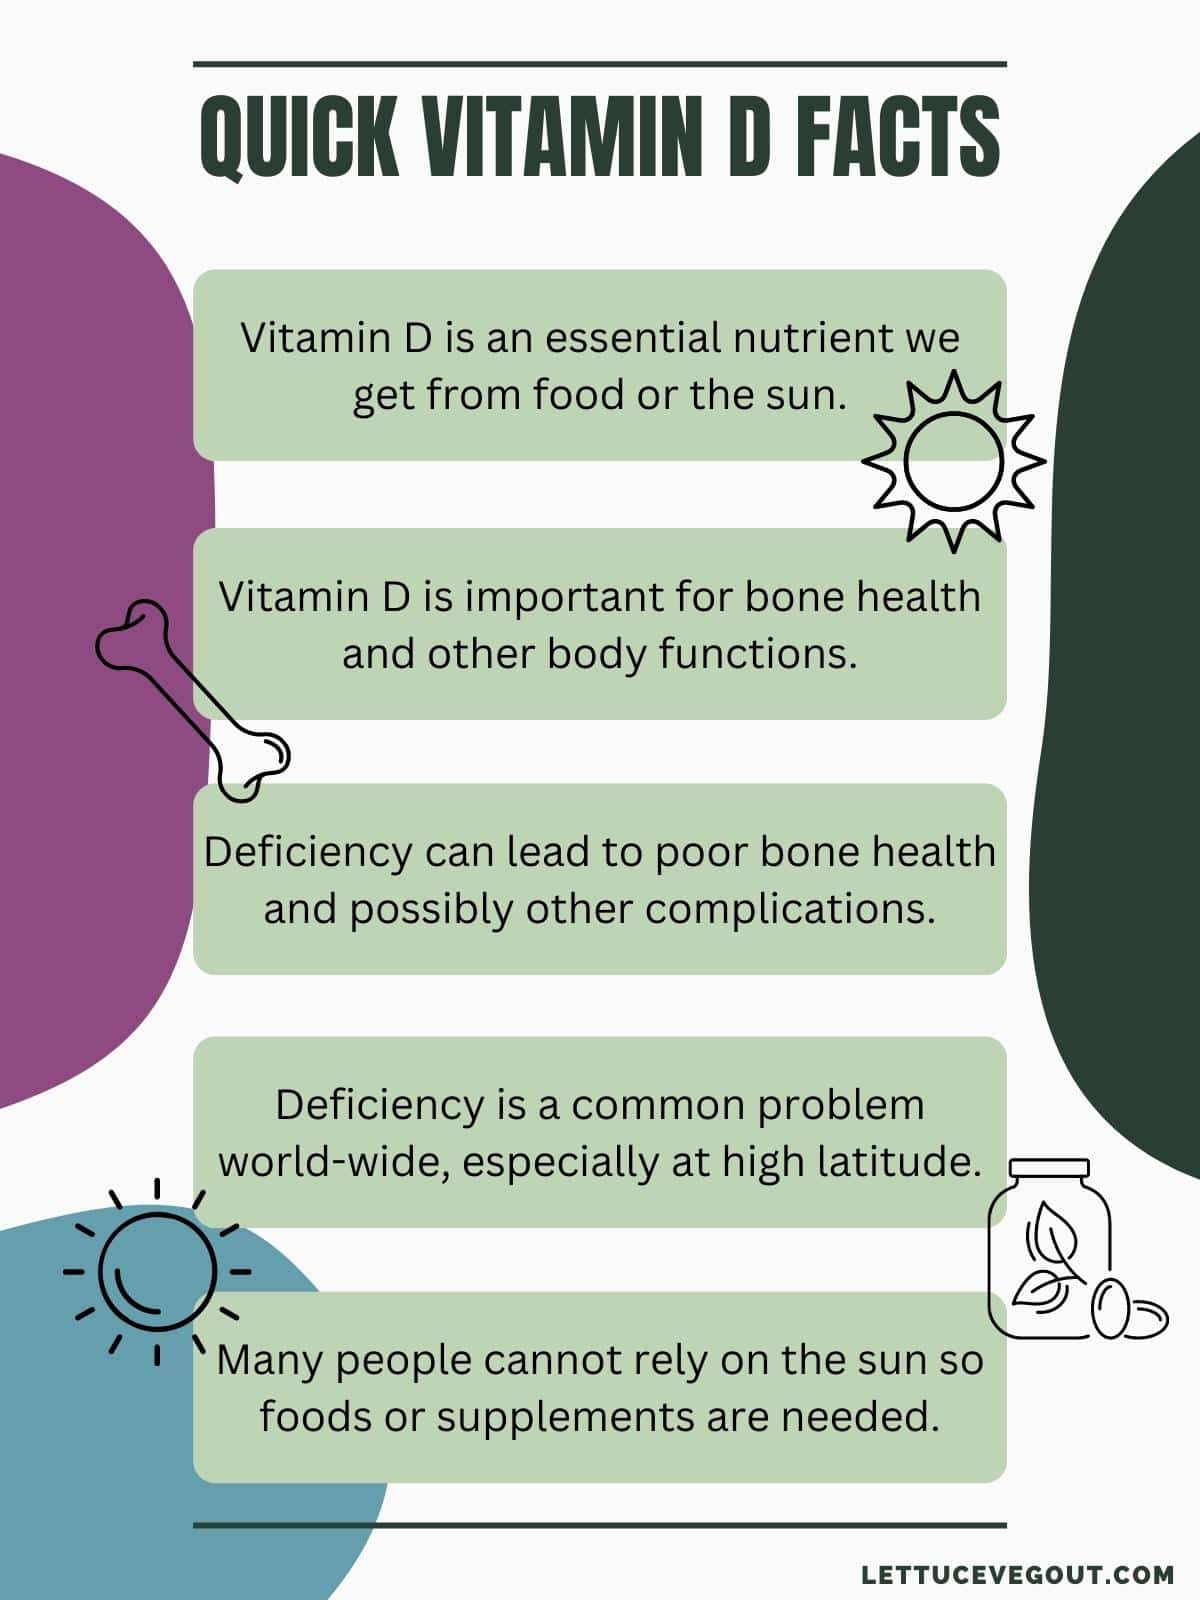 Infographic with quick facts about vitamin D.